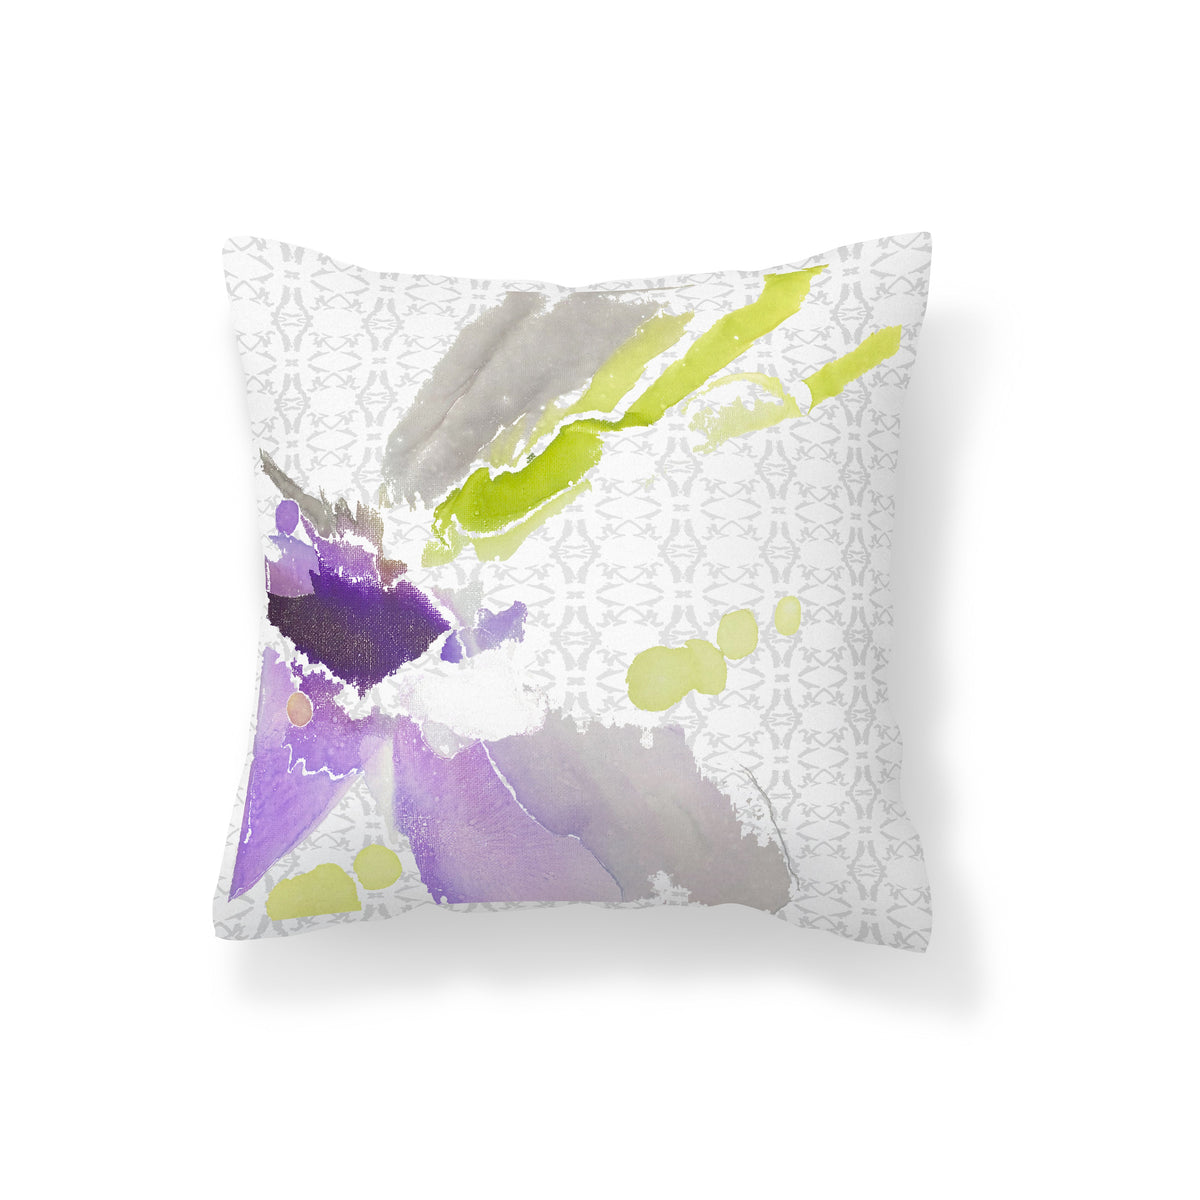 Throw Pillow - Painted Lady Emperor Thistle Bedding Collections, Pillows, Throw Pillows MWW 